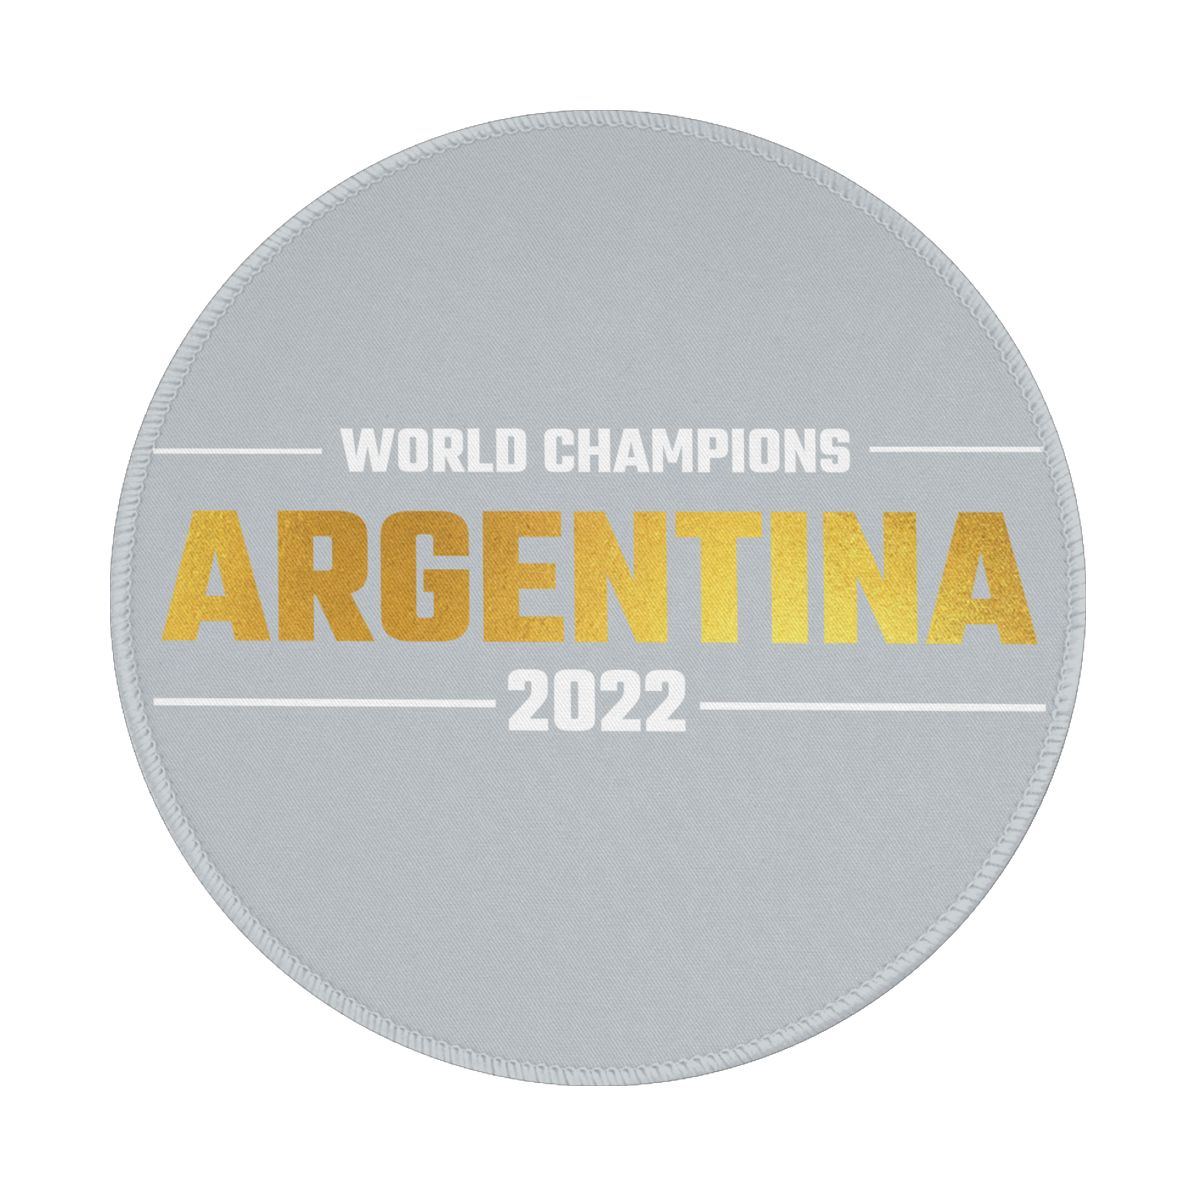 Argentina 2022 World Champions Waterproof Round Mouse Pad for Wireless Mouse